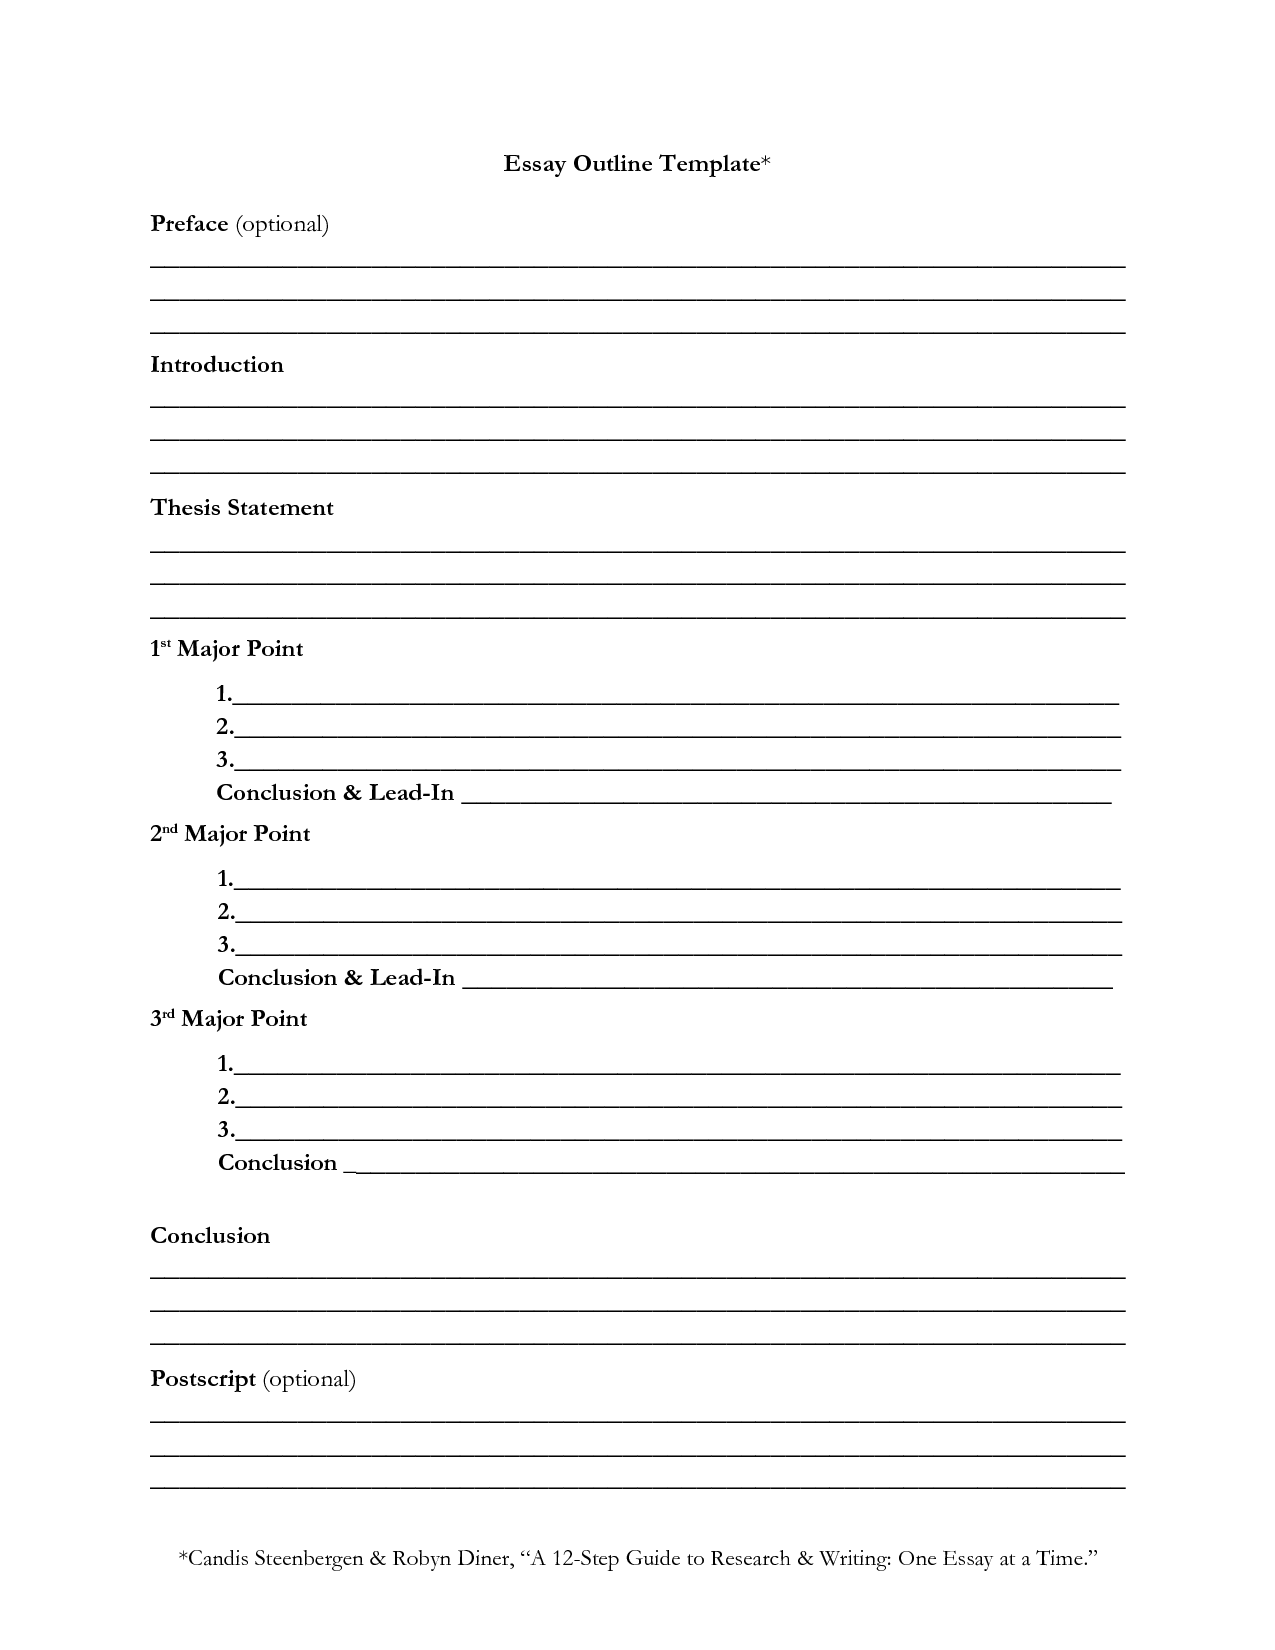 essay writing template for high school students